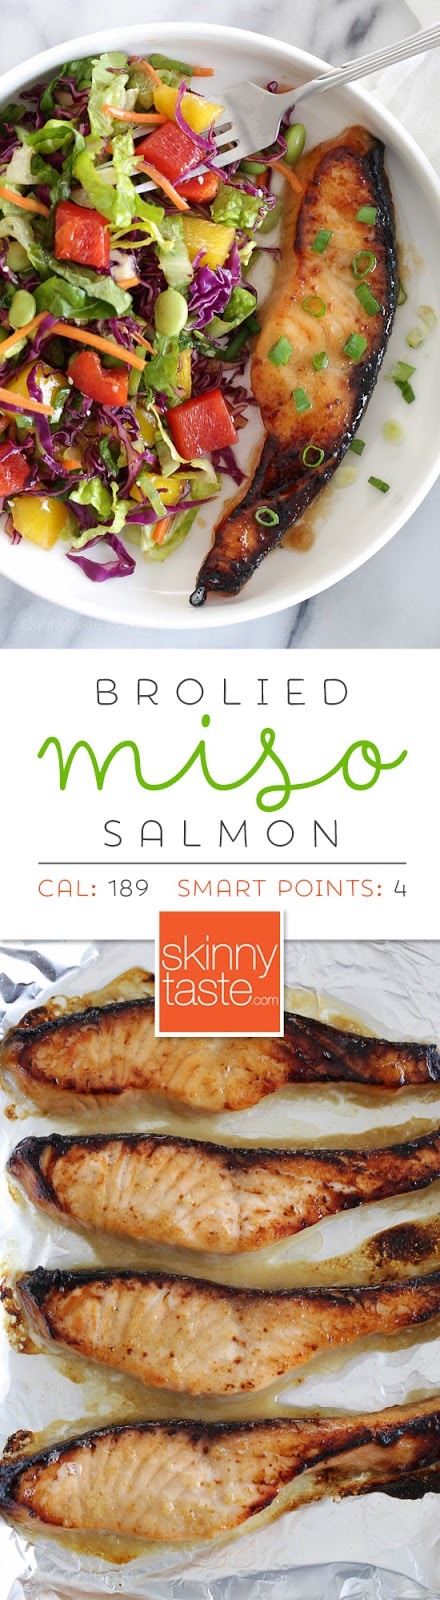 Broiled Miso Salmon – for a really quick dinner, marinate the salmon overnight with this EASY 3-ingredient miso marinade (it's so good) then broil the next day, takes about 7 minutes to cook! Smart Points: 4 Calories: 189